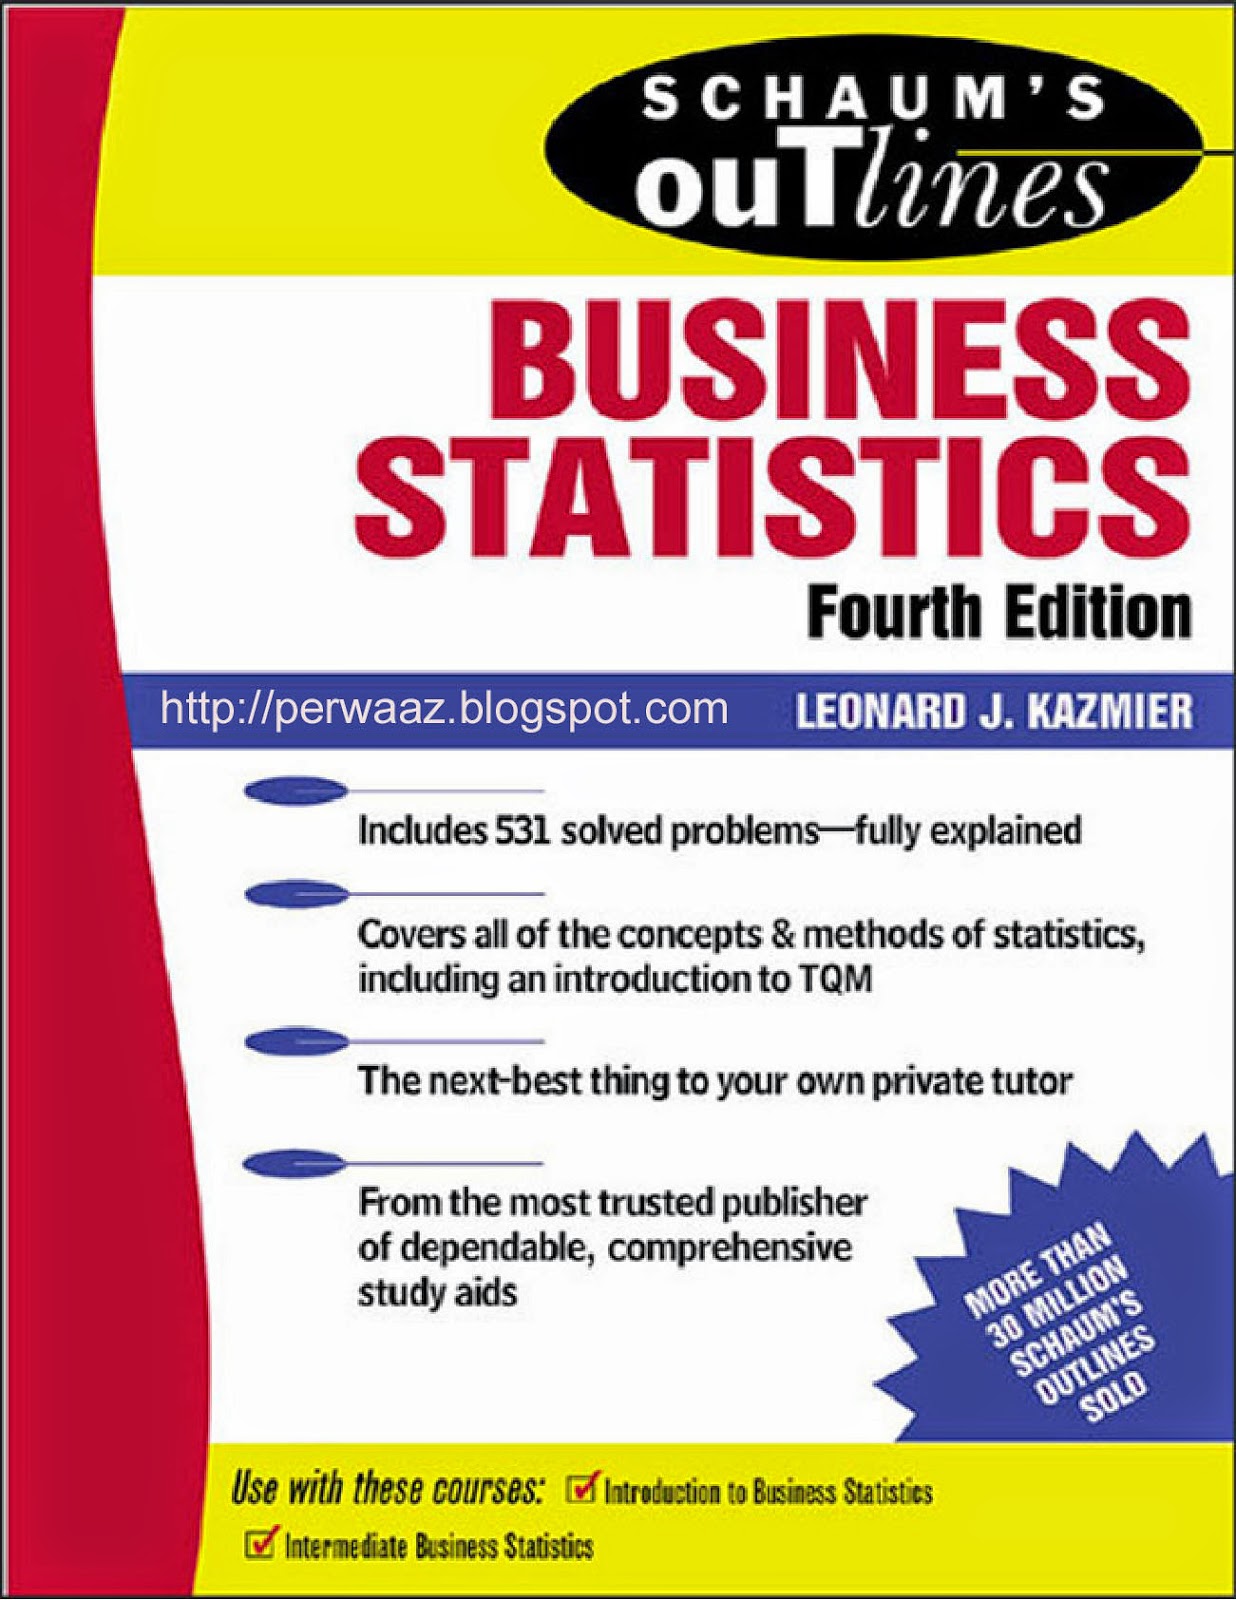 business administration books free download